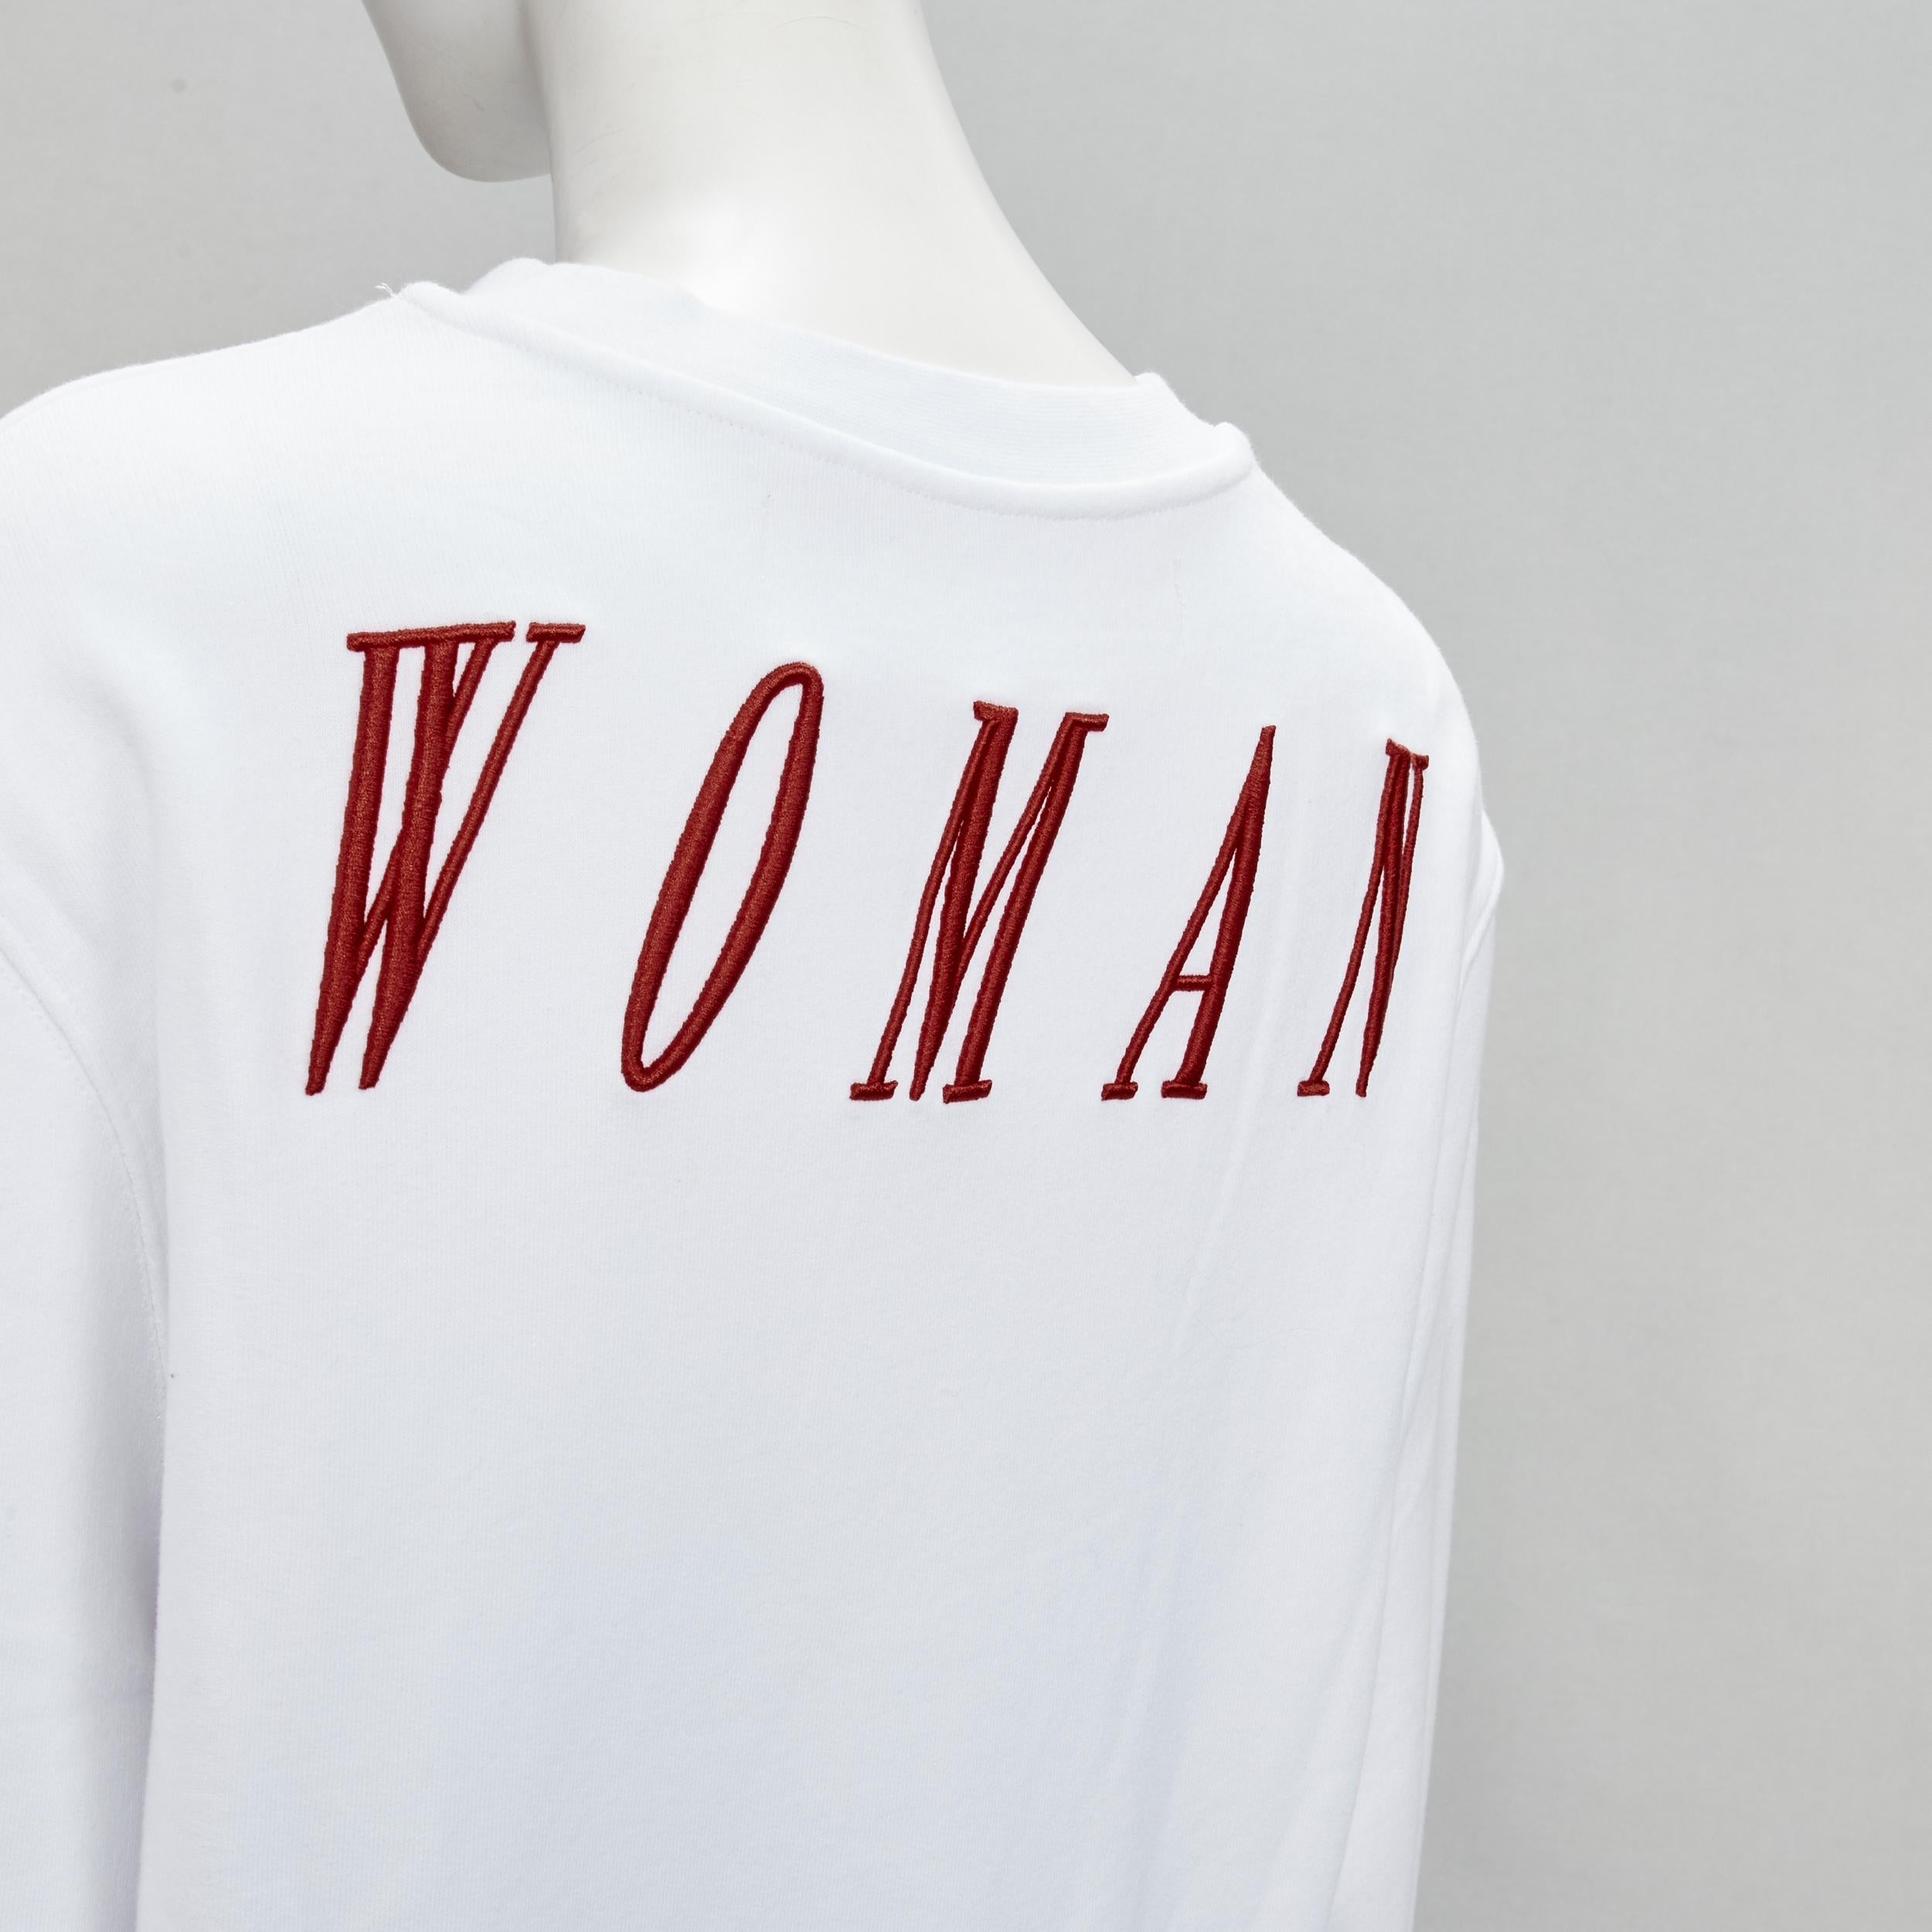 OFF WHITE Virgil Abloh Natural Woman red balloOn print embroidery sweatshirt M
Brand: Off White
Designer: Virgil Abloh
Material: Feels like cotton
Color: White

CONDITION:
Condition: Excellent, this item was pre-owned and is in excellent condition.